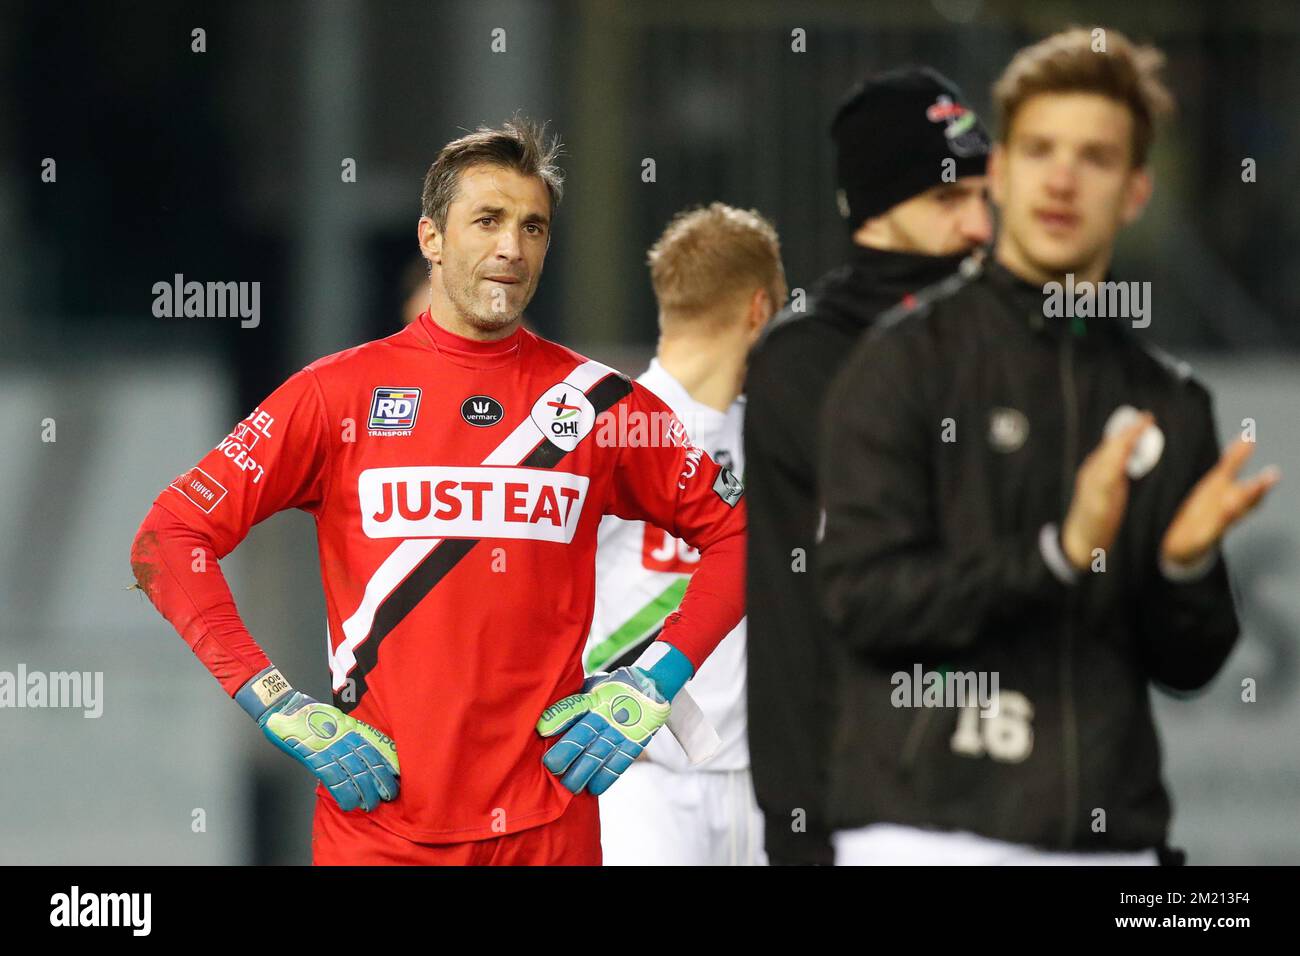 OHL's goalkeeper Rudy Riou looks dejected after the Jupiler Pro League match between OH Leuven and Club Brugge, in Heverlee, Sunday 13 March 2016, on day 30 of the Belgian soccer championship. BELGA PHOTO BRUNO FAHY Stock Photo